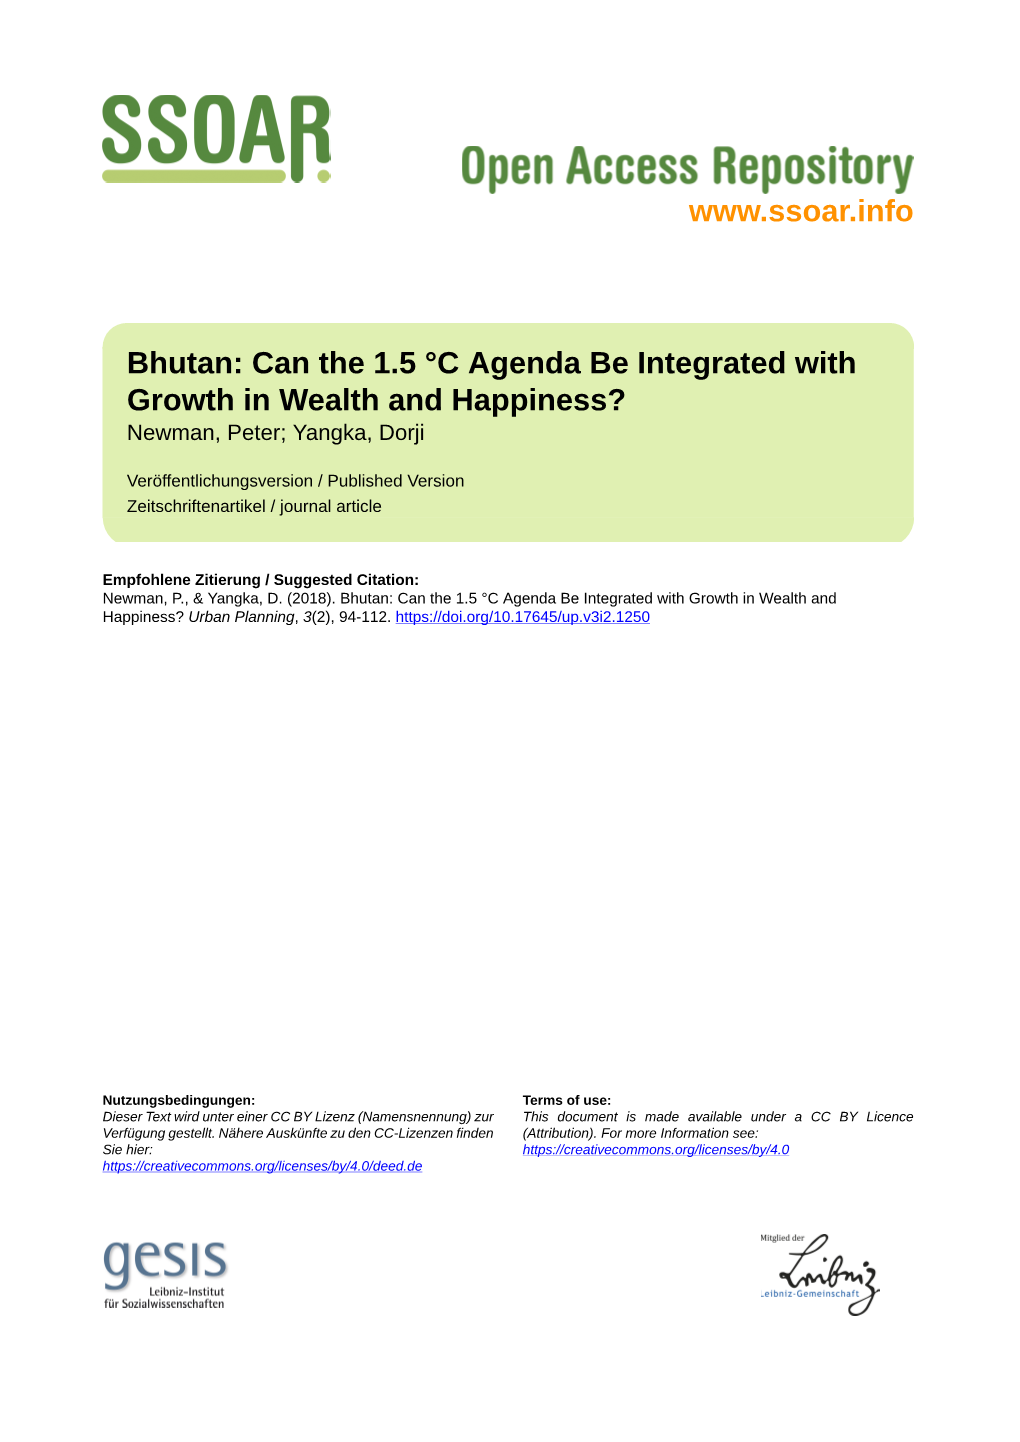 Bhutan: Can the 1.5 °C Agenda Be Integrated with Growth in Wealth and Happiness? Newman, Peter; Yangka, Dorji